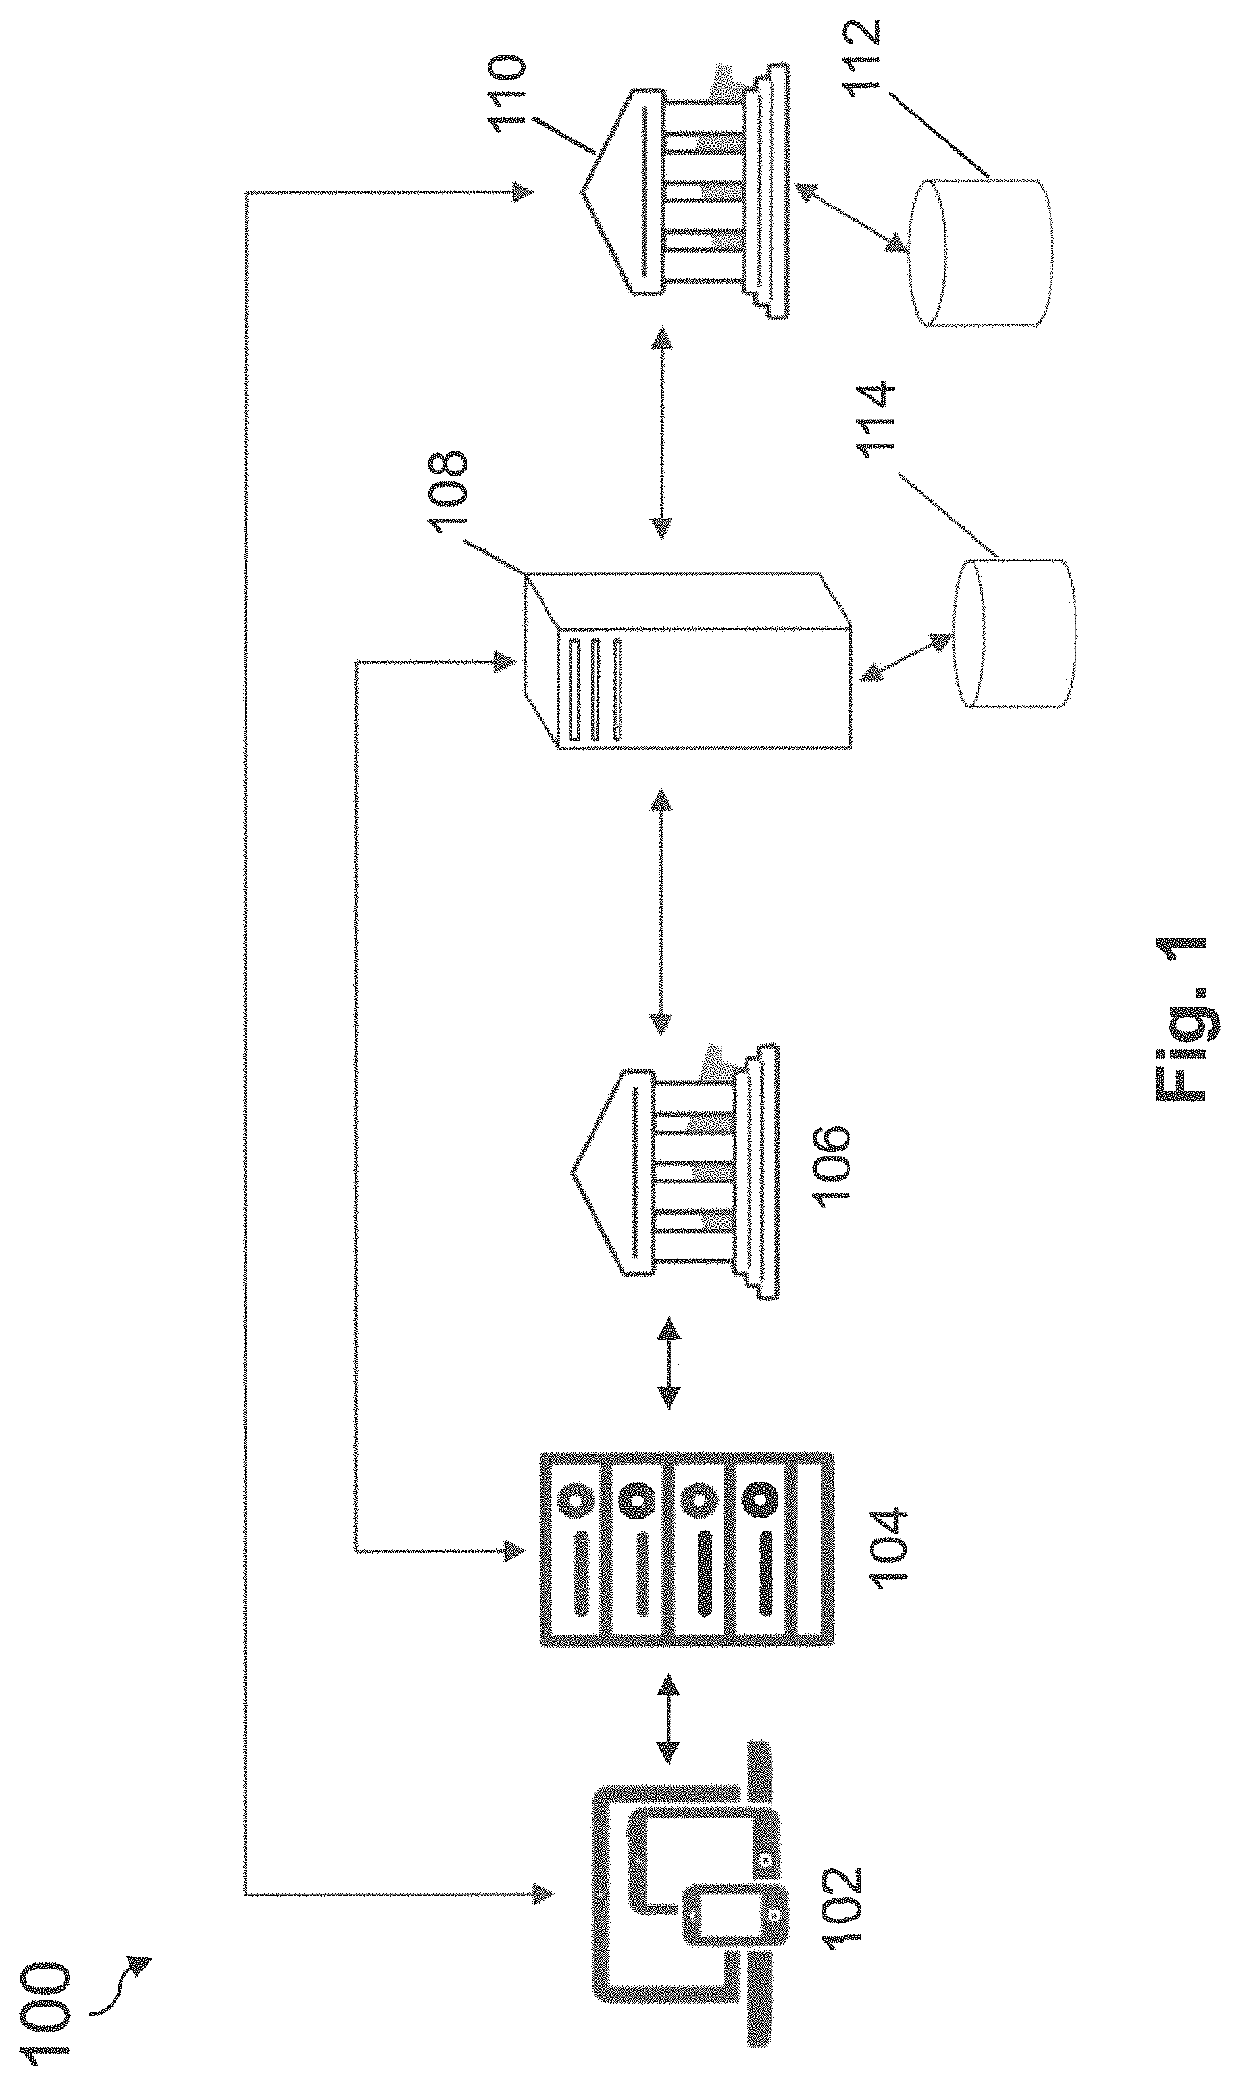 Computer system and computer-implemented method for processing an electronic commerce transaction using a network